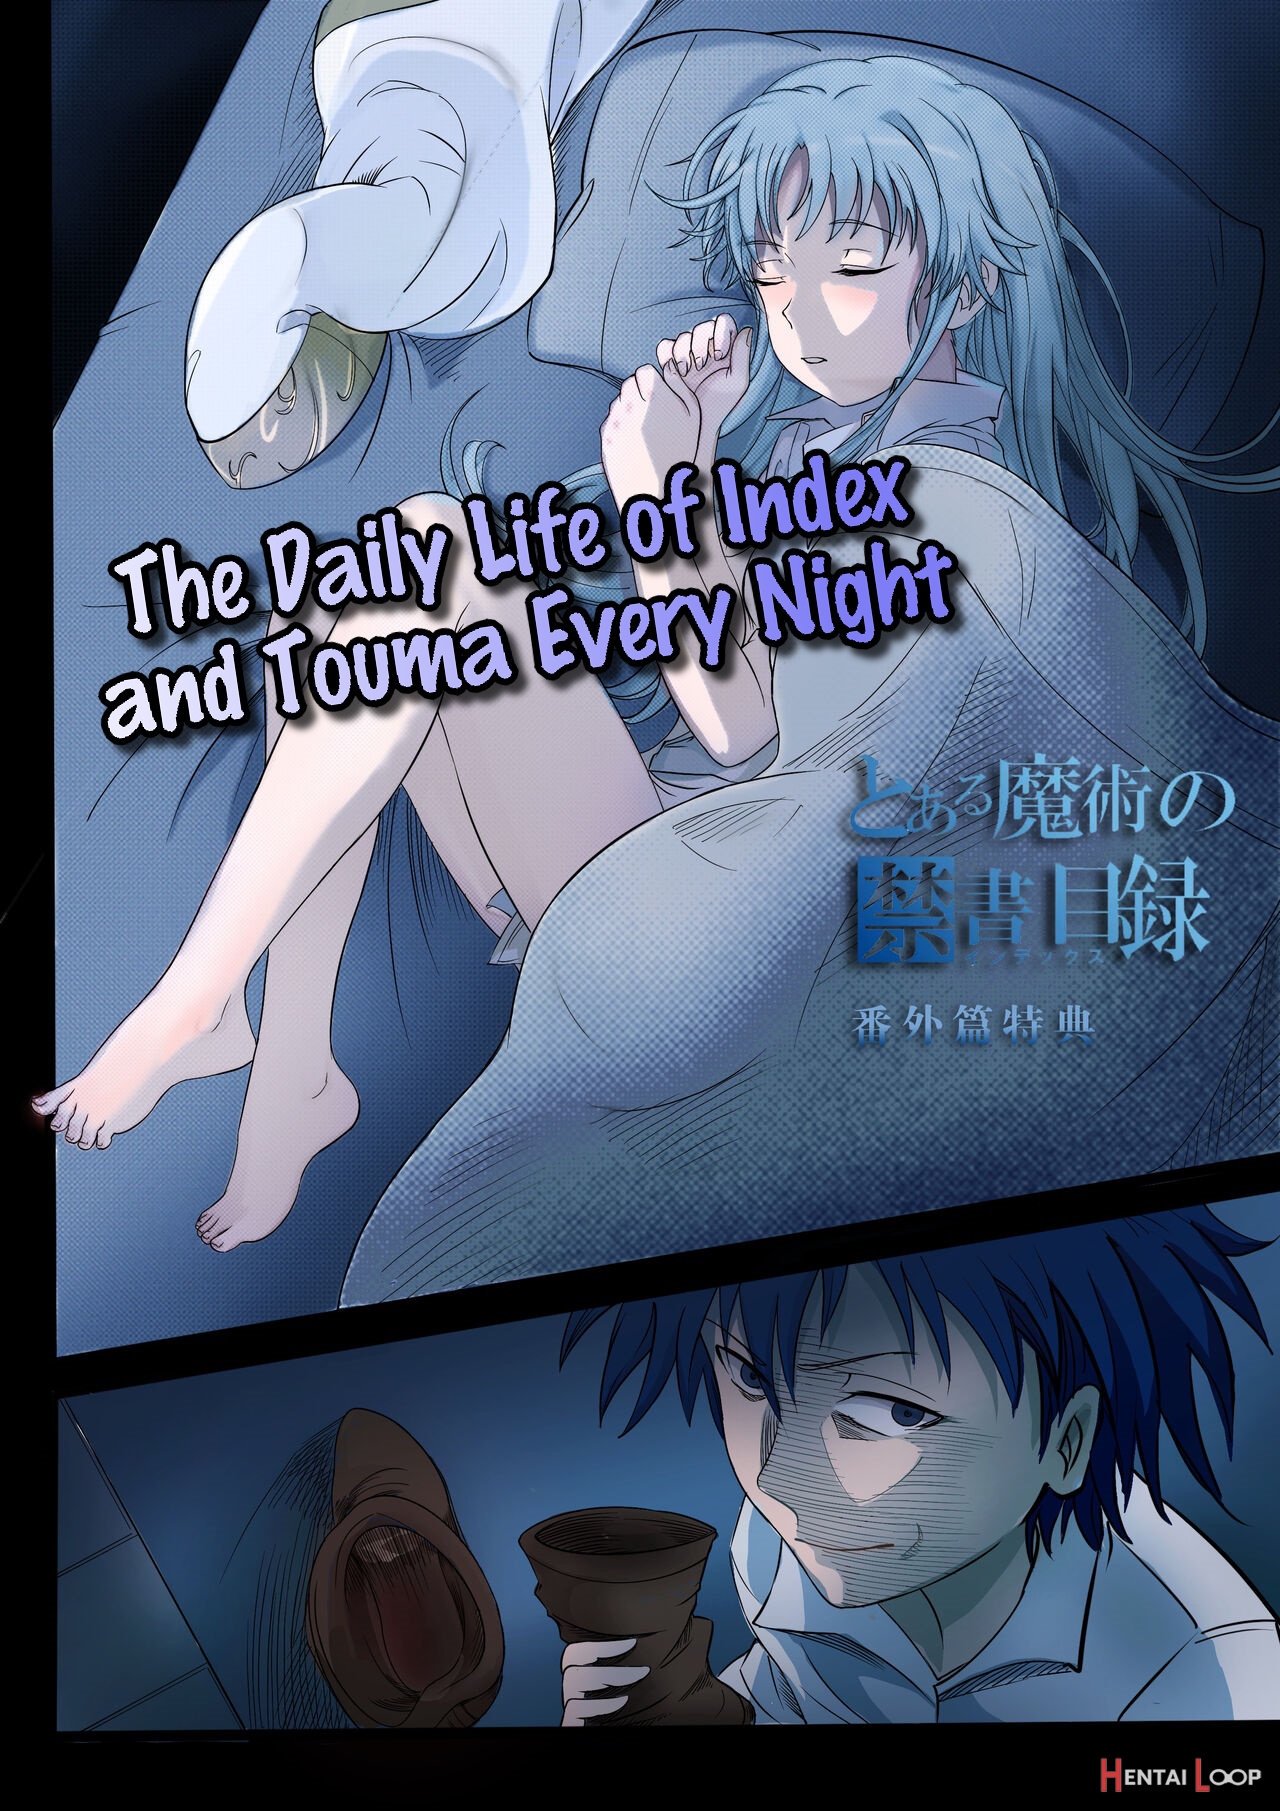 The Daily Life Of Index And Touma Every Night page 1